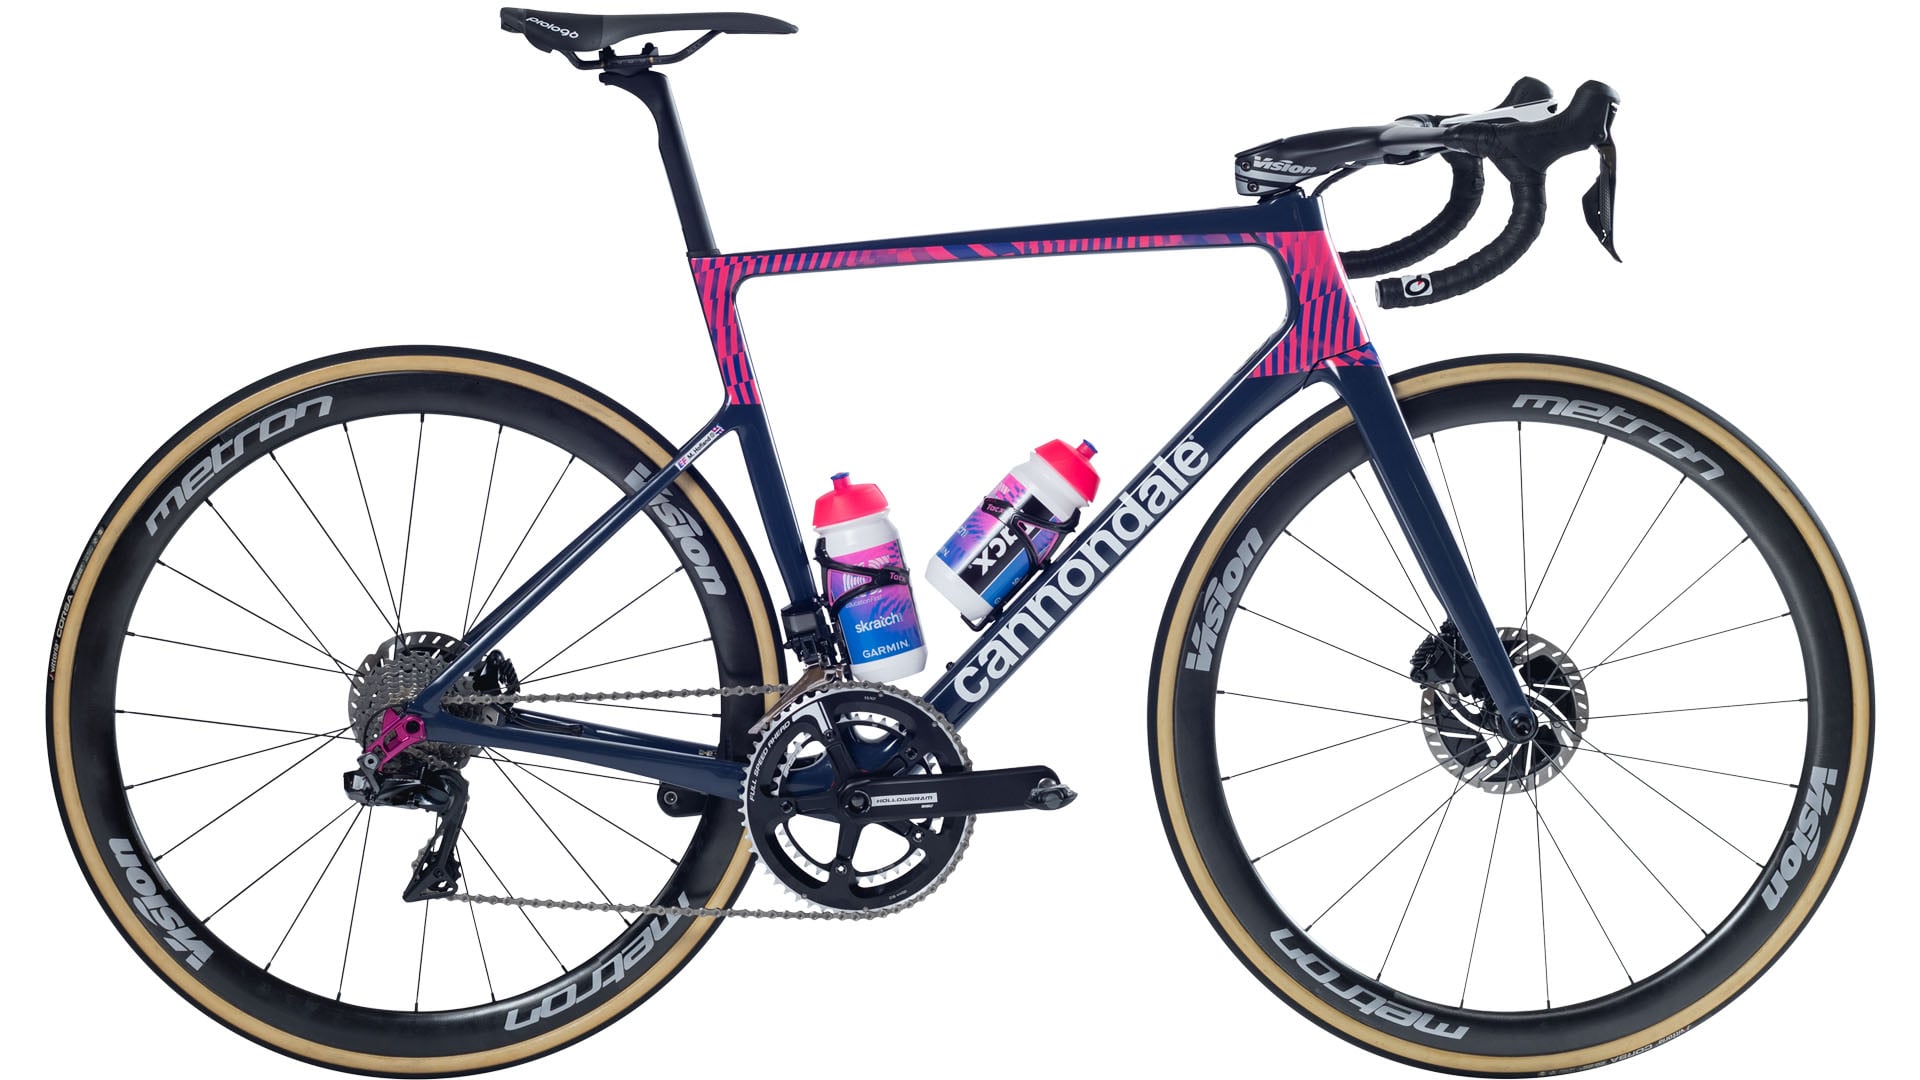 Cannondale teamfiets EF EDUCATION - NIPPO